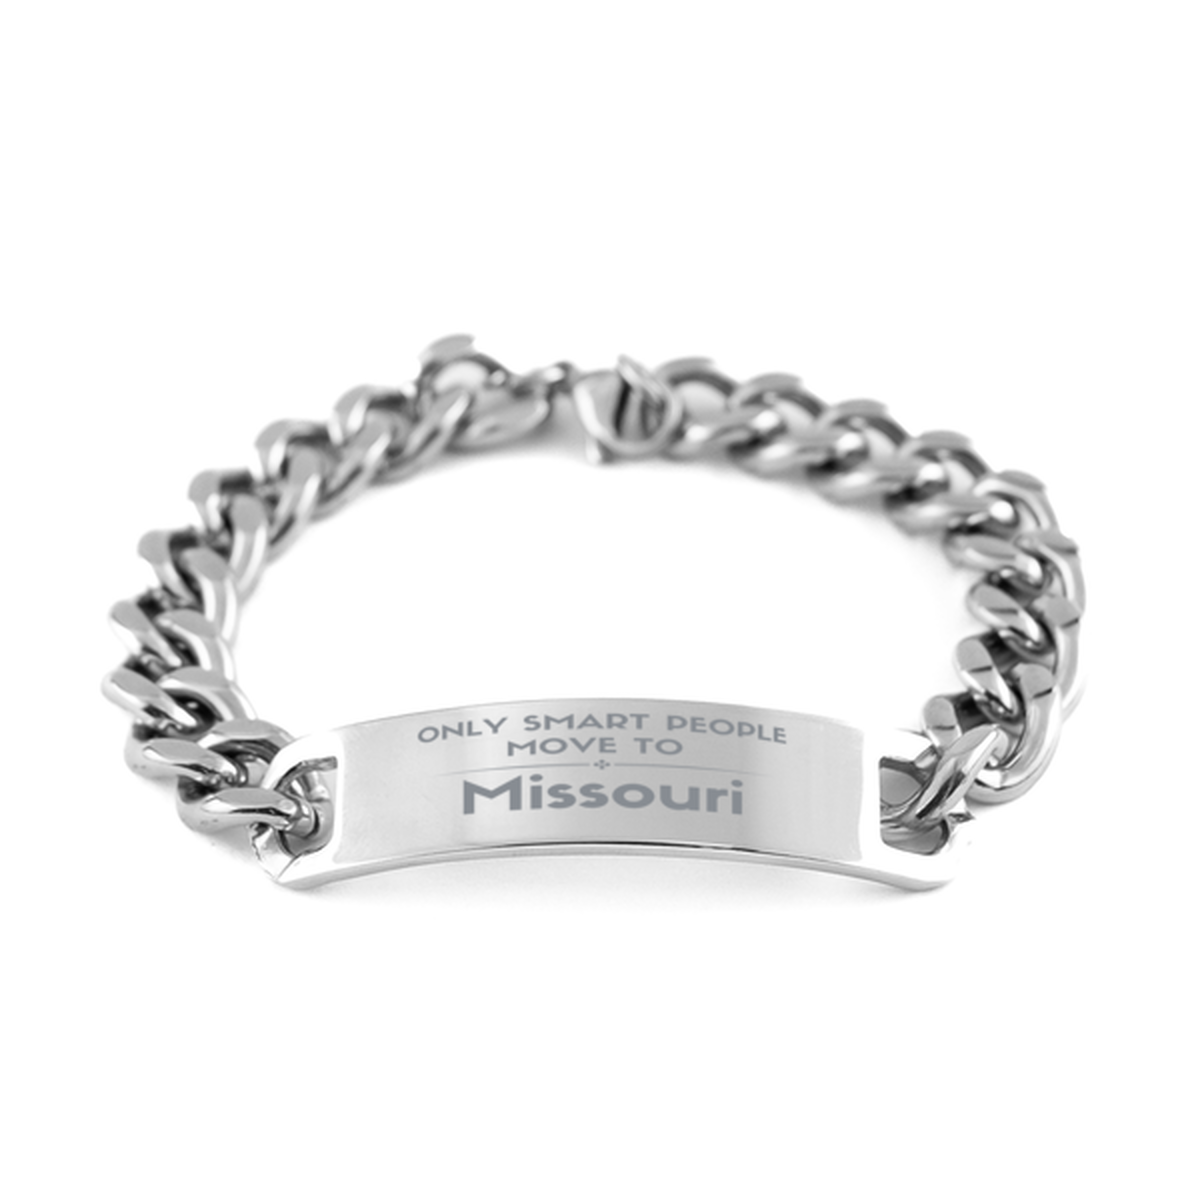 Only smart people move to Missouri Cuban Chain Stainless Steel Bracelet, Gag Gifts For Missouri, Move to Missouri Gifts for Friends Coworker Funny Saying Quote